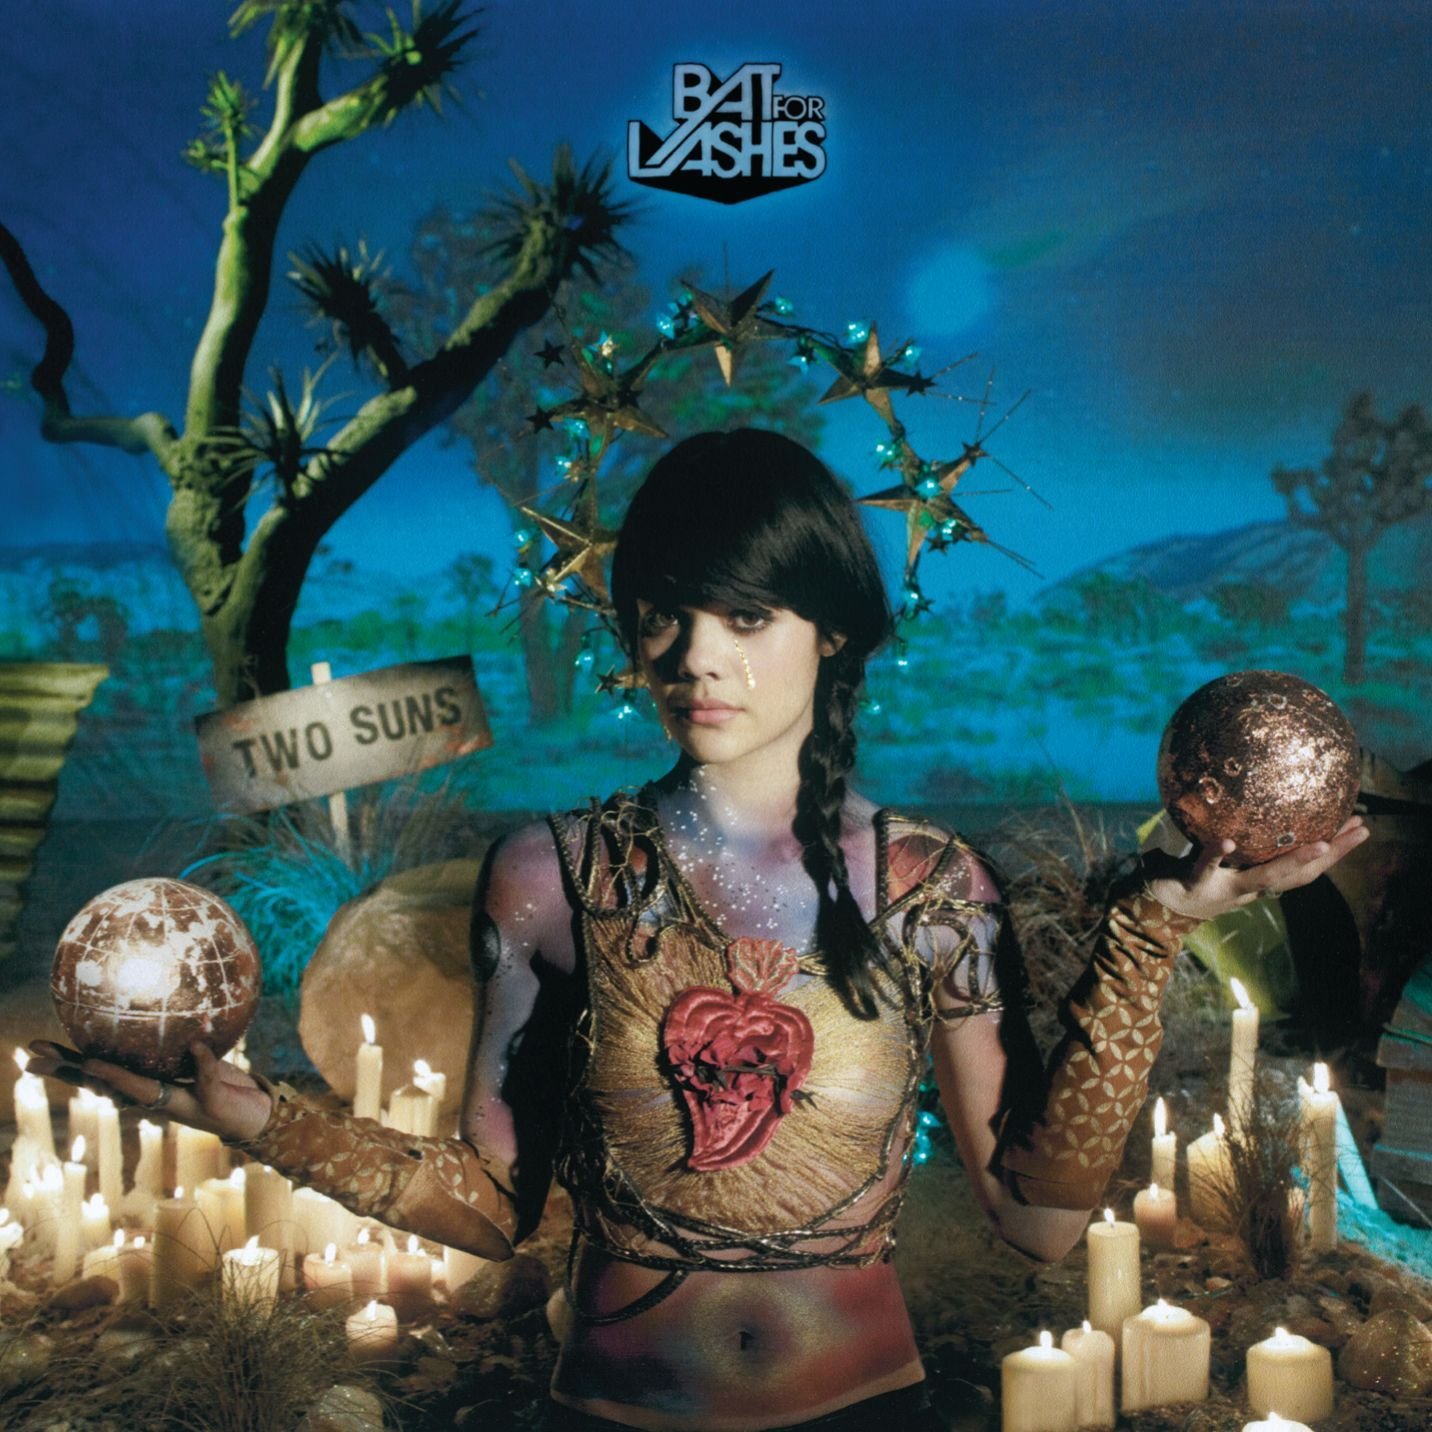 Bat for Lashes — Two Planets cover artwork